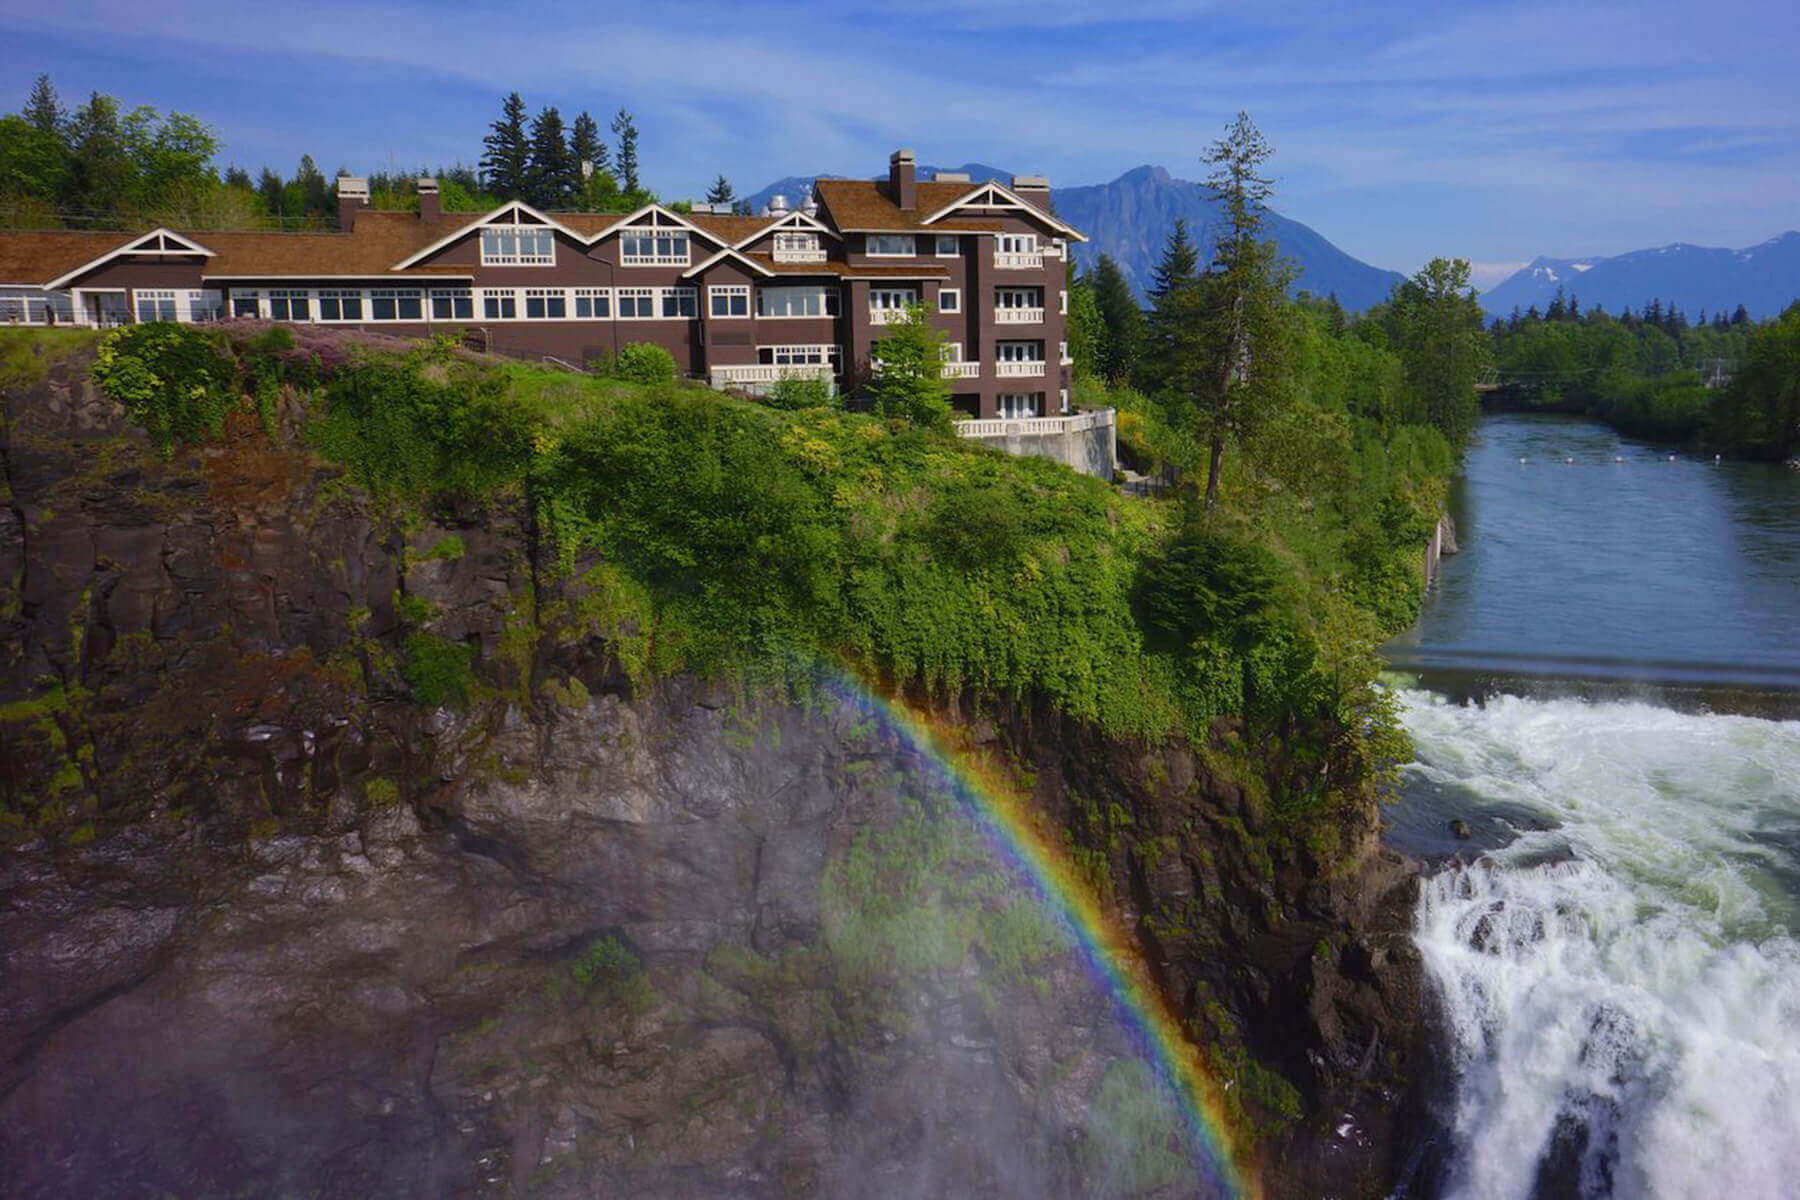 Exterior of Salish Lodge & Spa by Snoqualmie Falls. 